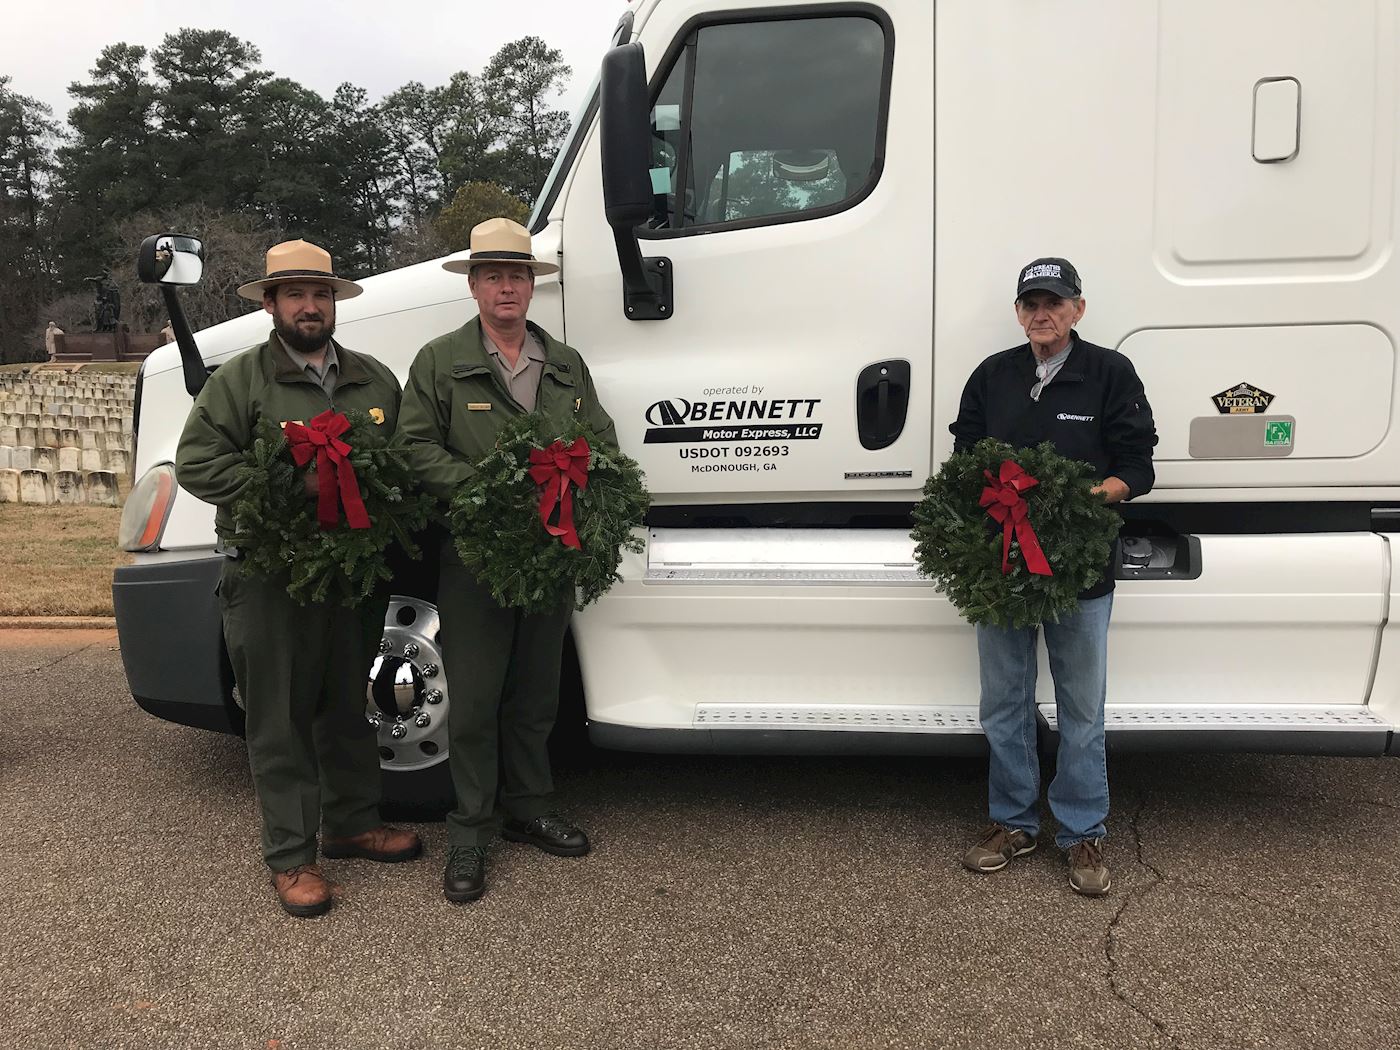 Bennett is proud to honor our fallen service members from all eras by participating for the first time in Wreaths Across America. Marty Roberts, a Bennett Motor Express owner operator who served 9 years in the Army, picked up a trailer load of wreaths at the National Headquarters in Harrington, Maine on Monday. This morning, Marty arrived at the Andersonville National Cemetery in Georgia to deliver over 3,100 wreaths that will be presented tomorrow on grave sites of fallen veterans there. This ceremony is one of 1,200 that will take place including the largest at Arlington National Cemetery. Joining Marty, was Lee Gentry EVP of Bennett. Both said that they are humbled and honored to take part in the efforts.